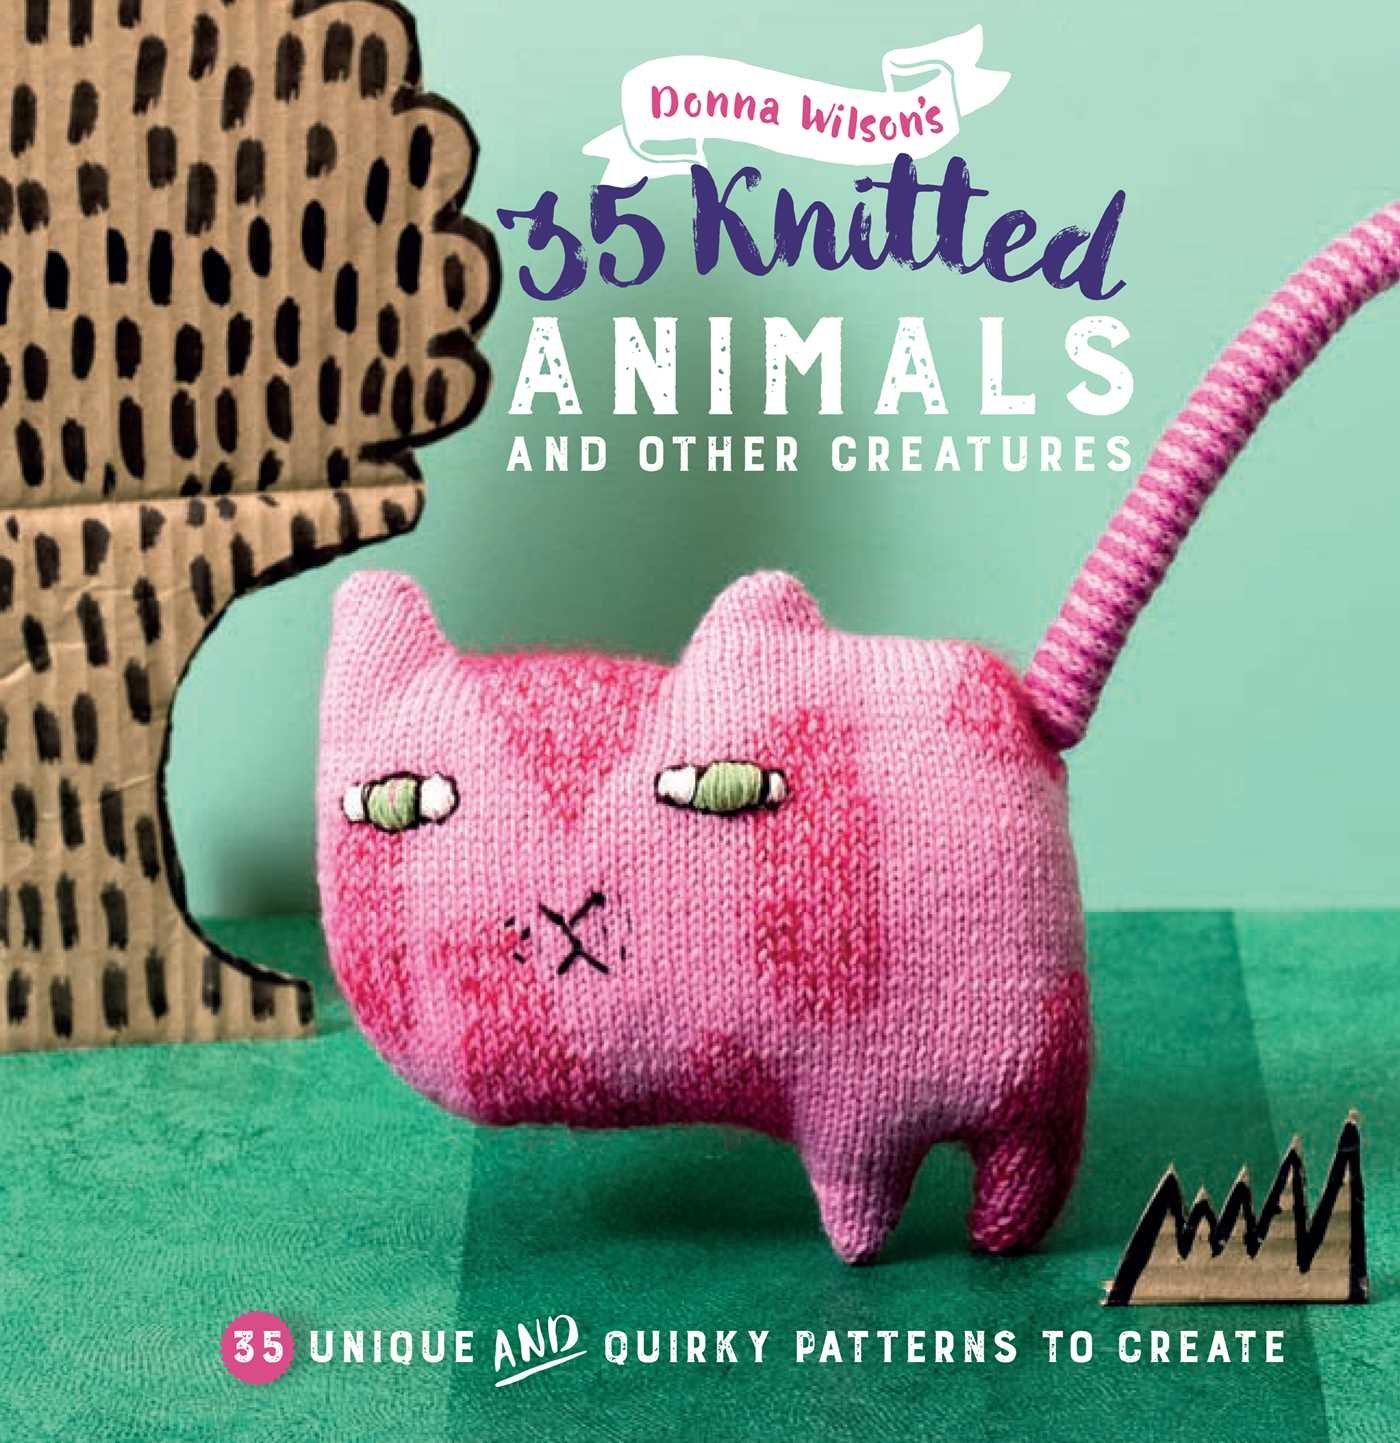 35 Knitted Animals and other creatures | 